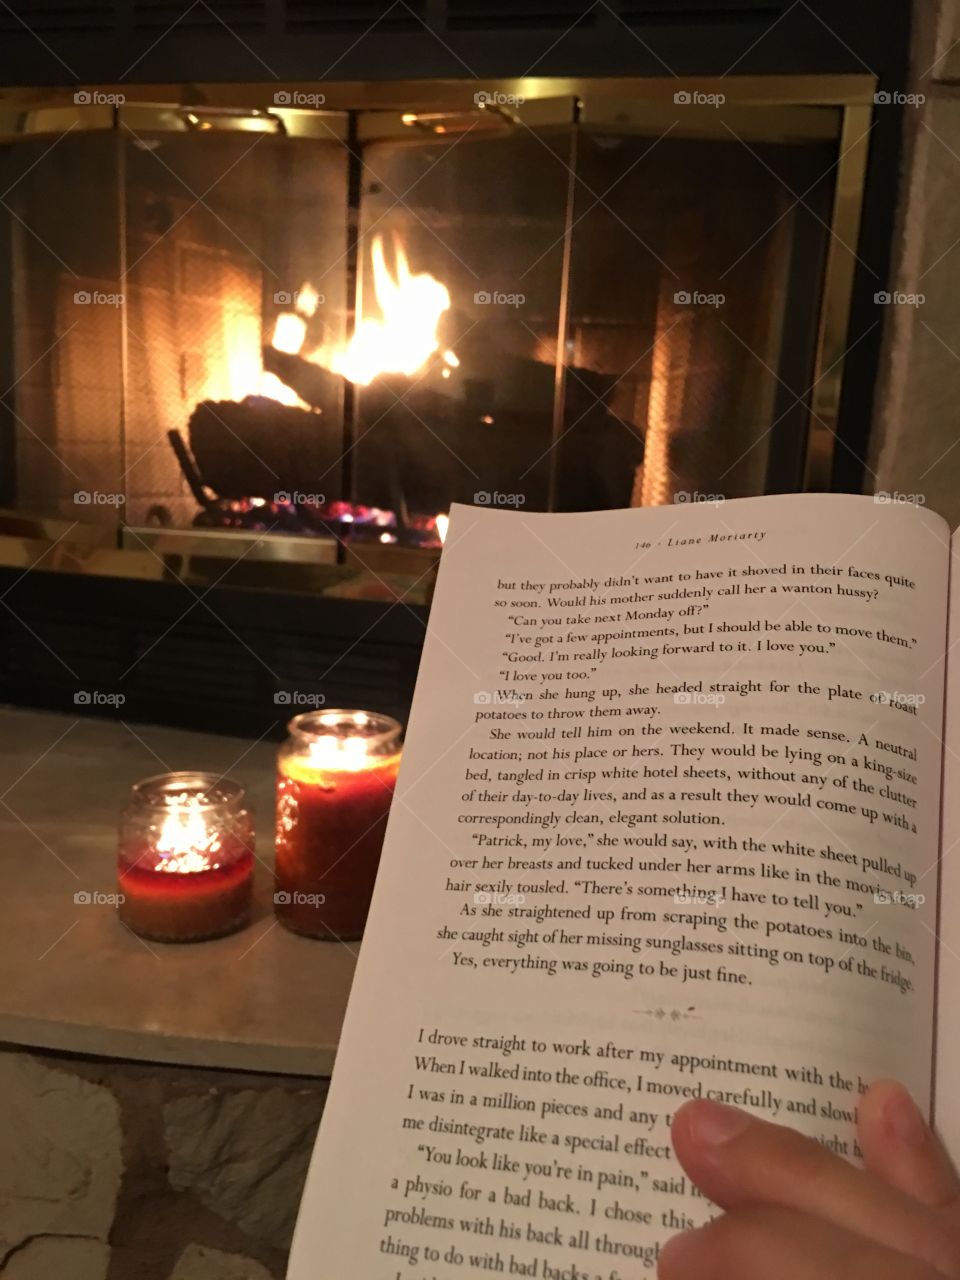 Reading peacefully by the fireplace